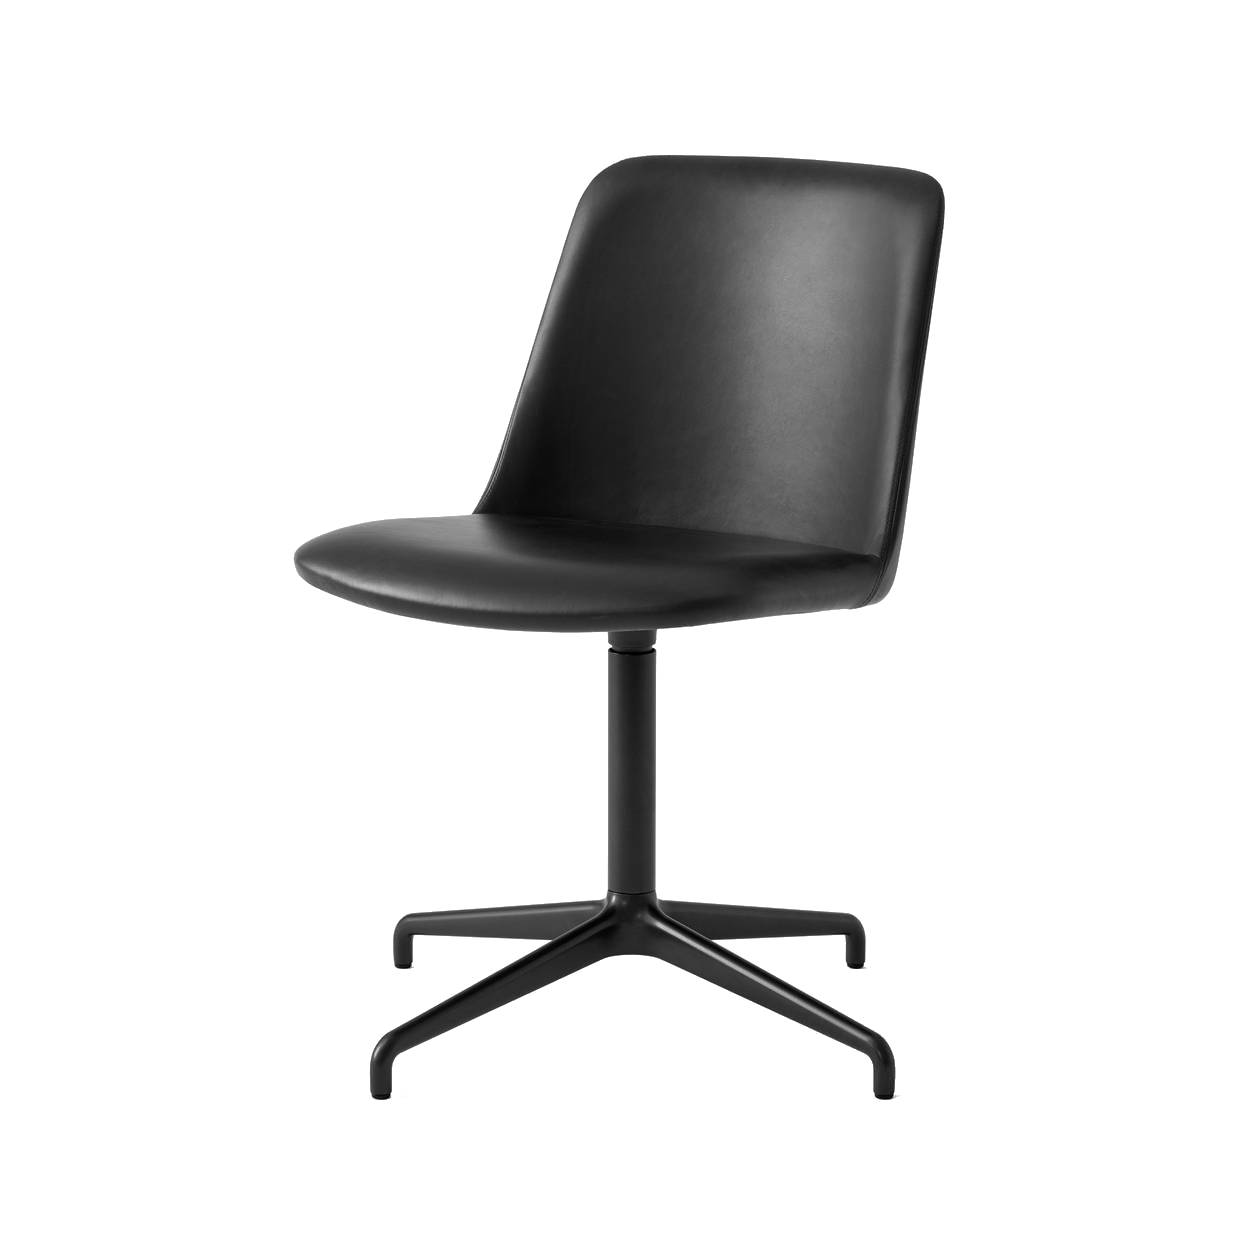 Rely Chair HW13: Black